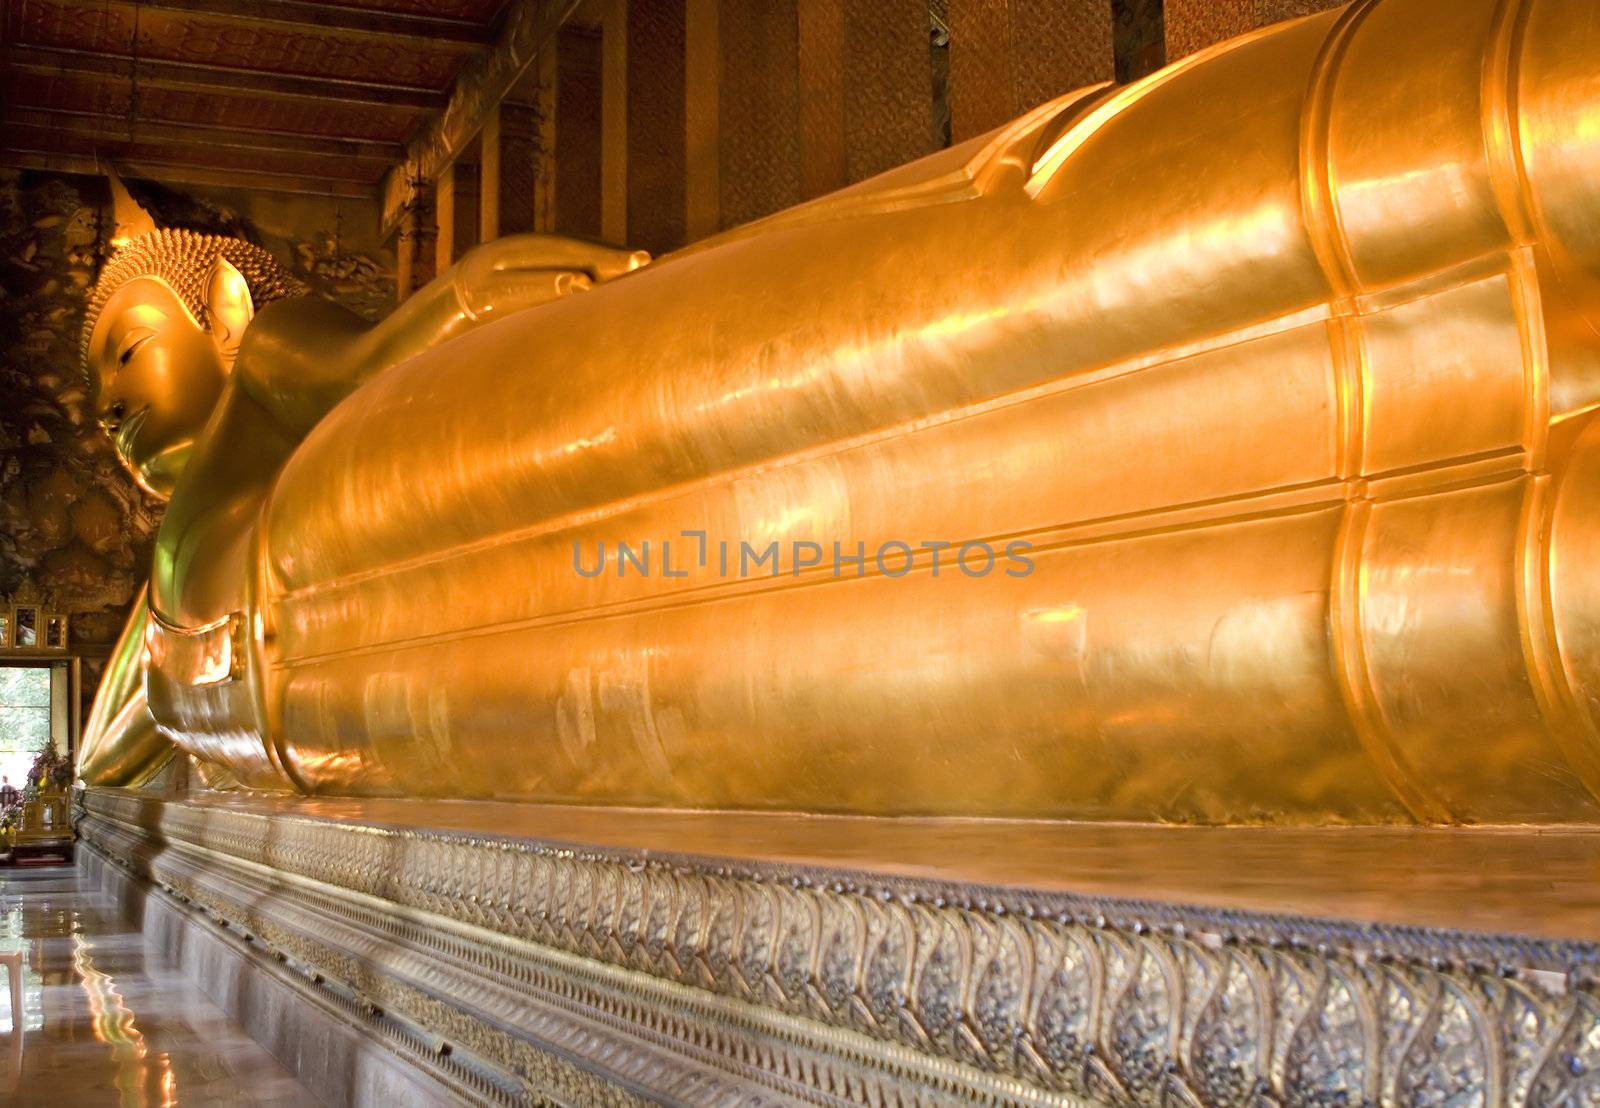 The reclining Buddha in Wat Pho temple, Thailand